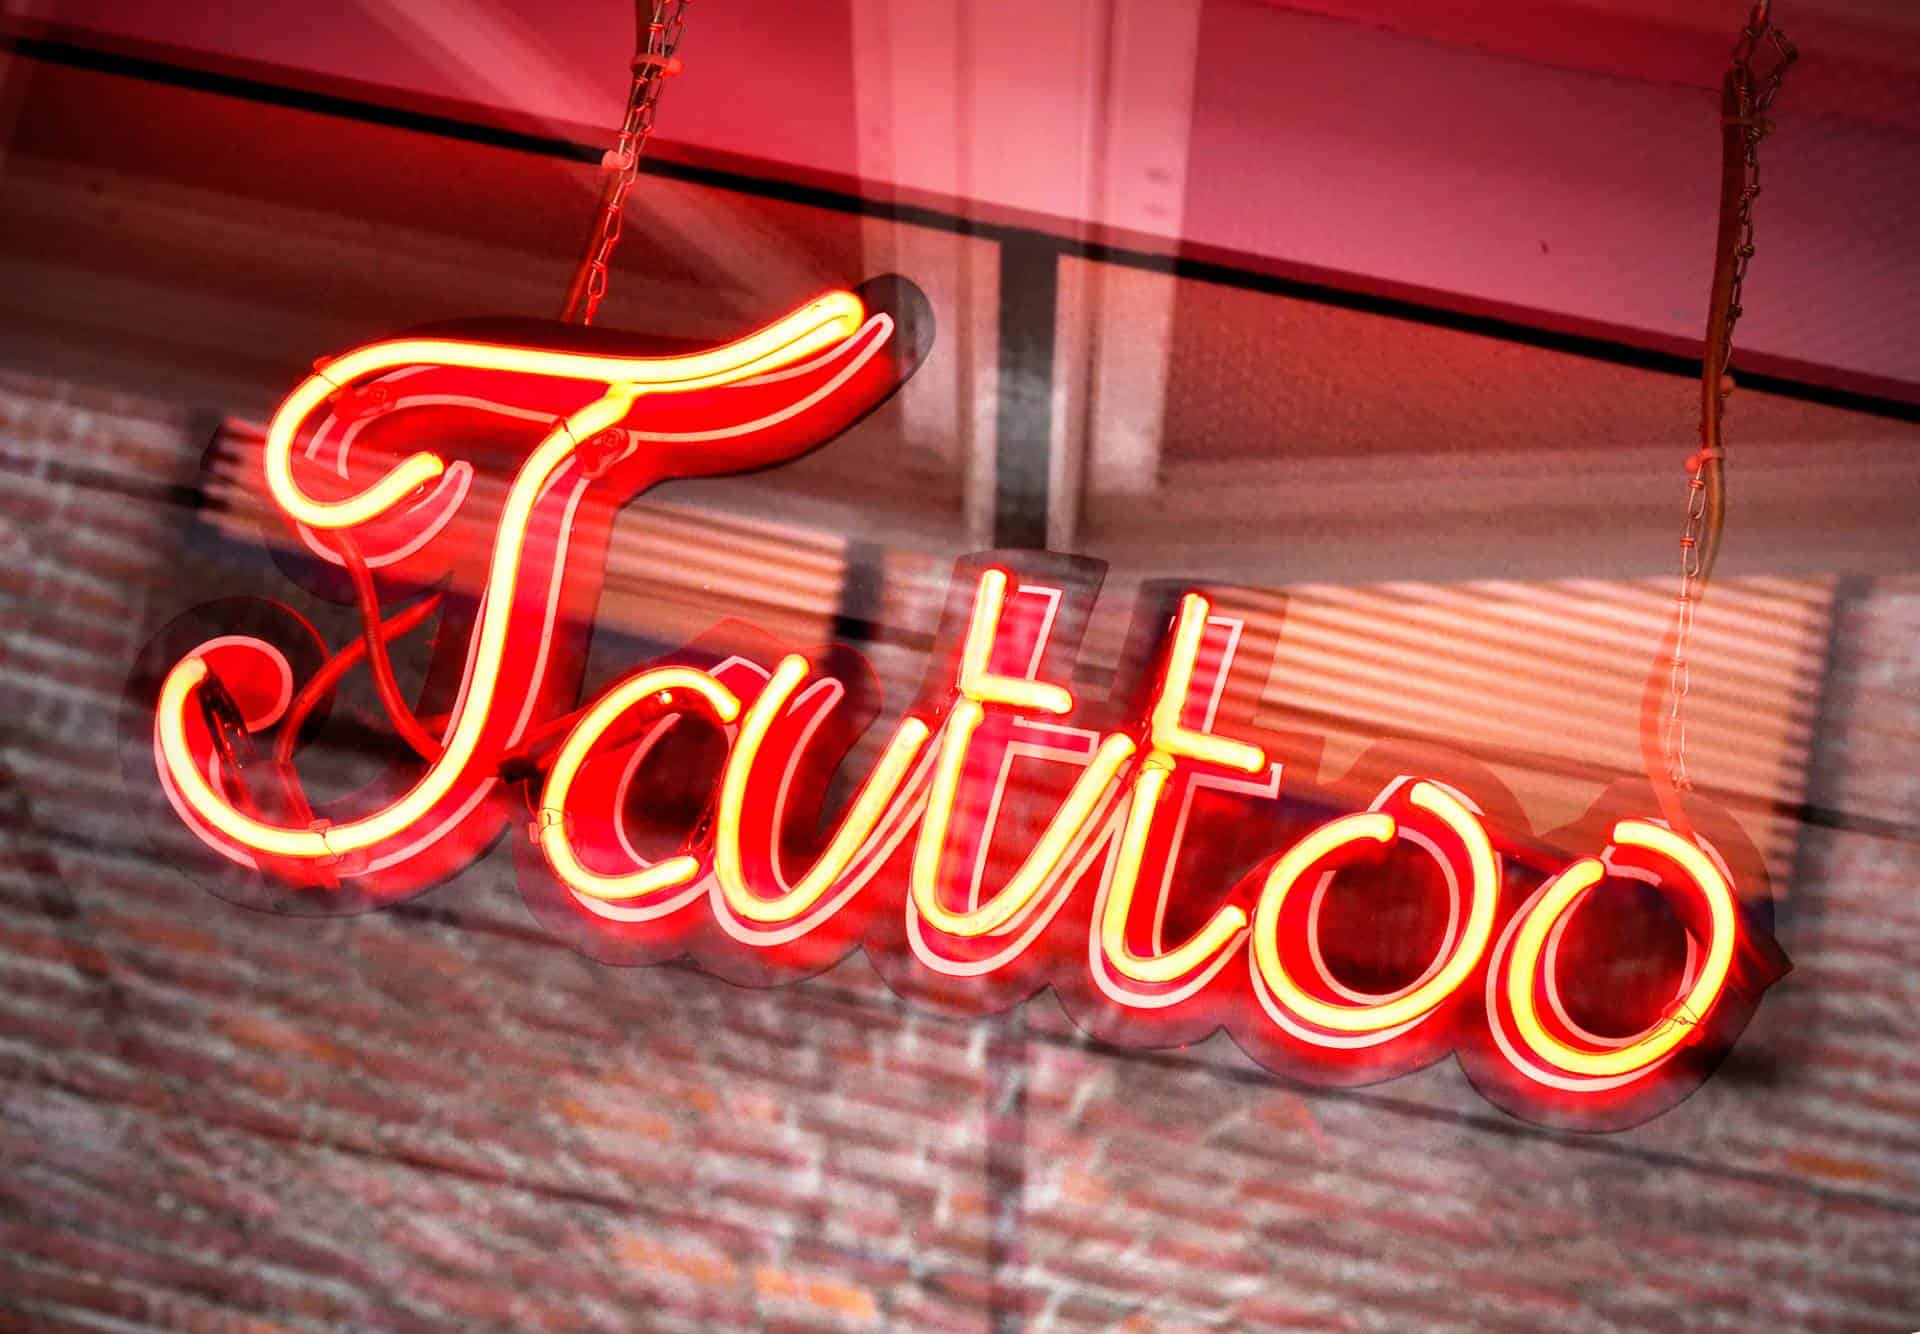 Where is the best place to get a tattoo done in Europe?